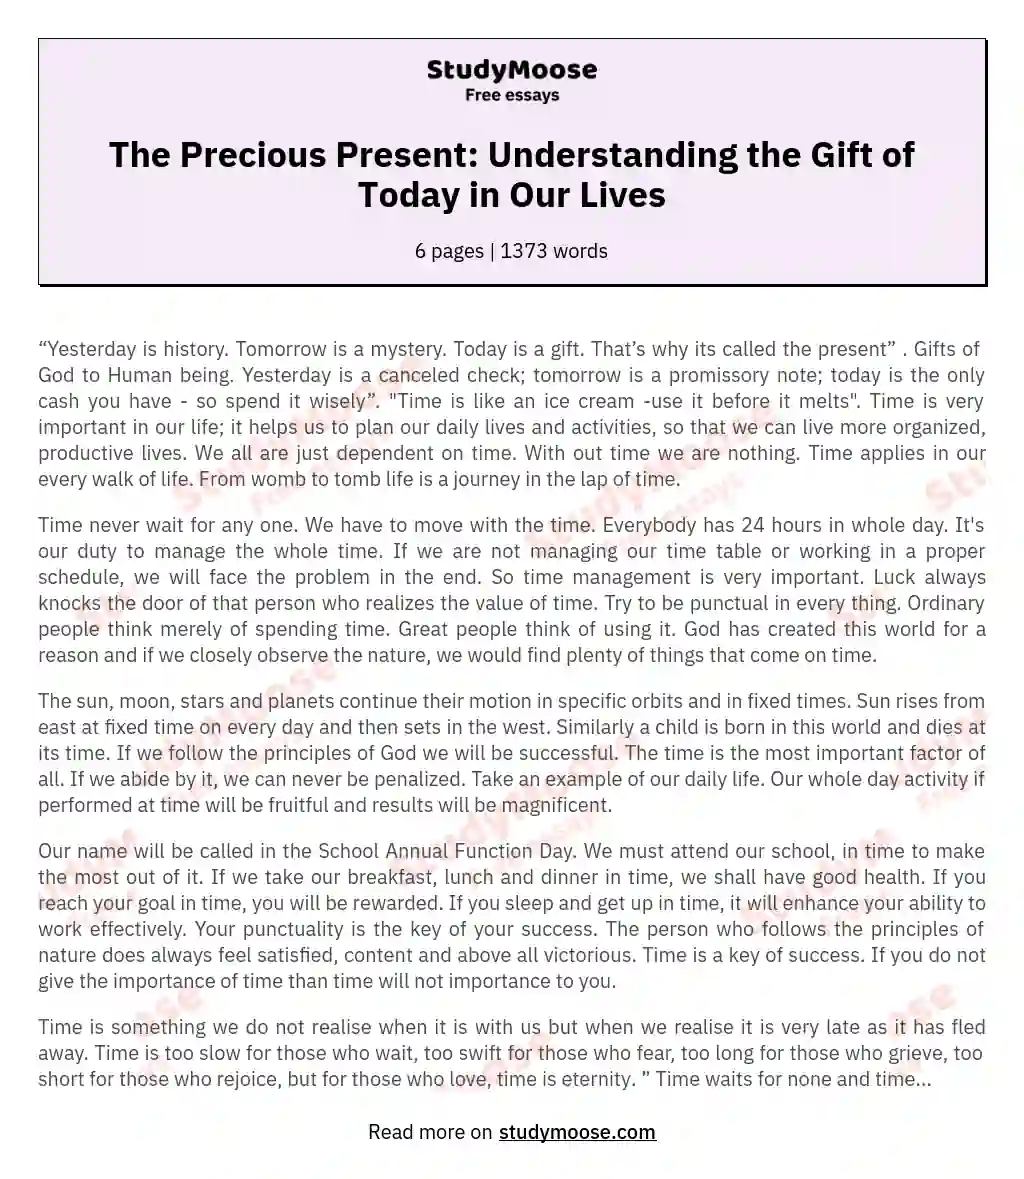 The Precious Present: Understanding the Gift of Today in Our Lives essay